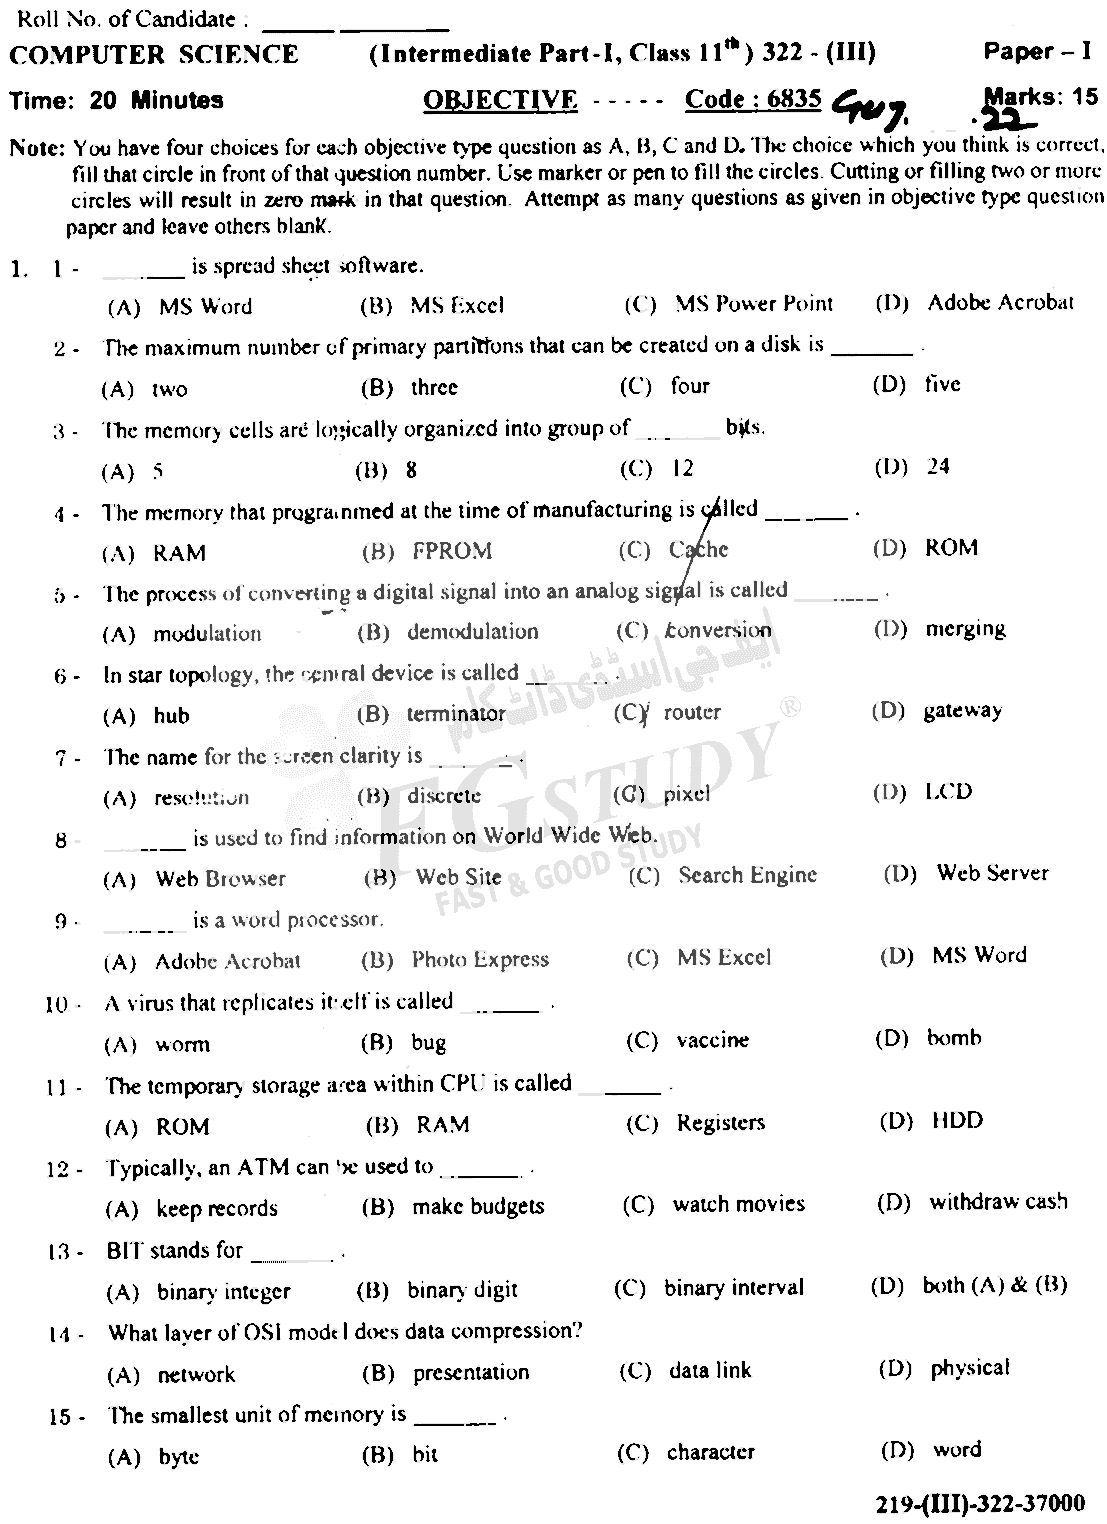 11th Class Computer Science Past Paper 2022 Gujranwala Board Objective